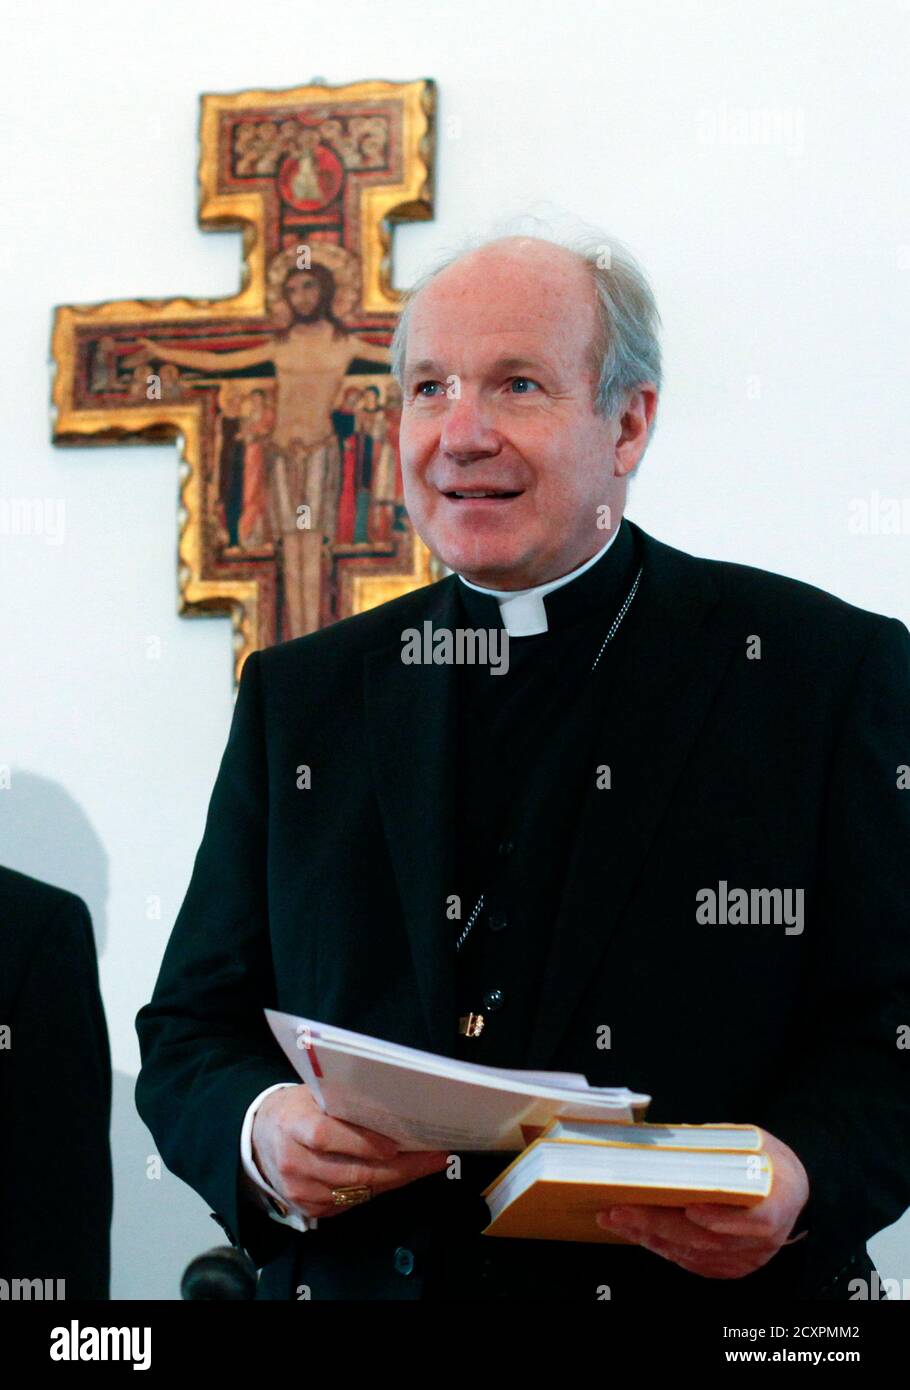 Cardinal Christoph Schoenborn, Archbishop of Vienna, briefs the media during a news conference in Vienna March 23, 2012.    REUTERS/Herwig Prammer  (AUSTRIA - Tags: POLITICS RELIGION) Stock Photo